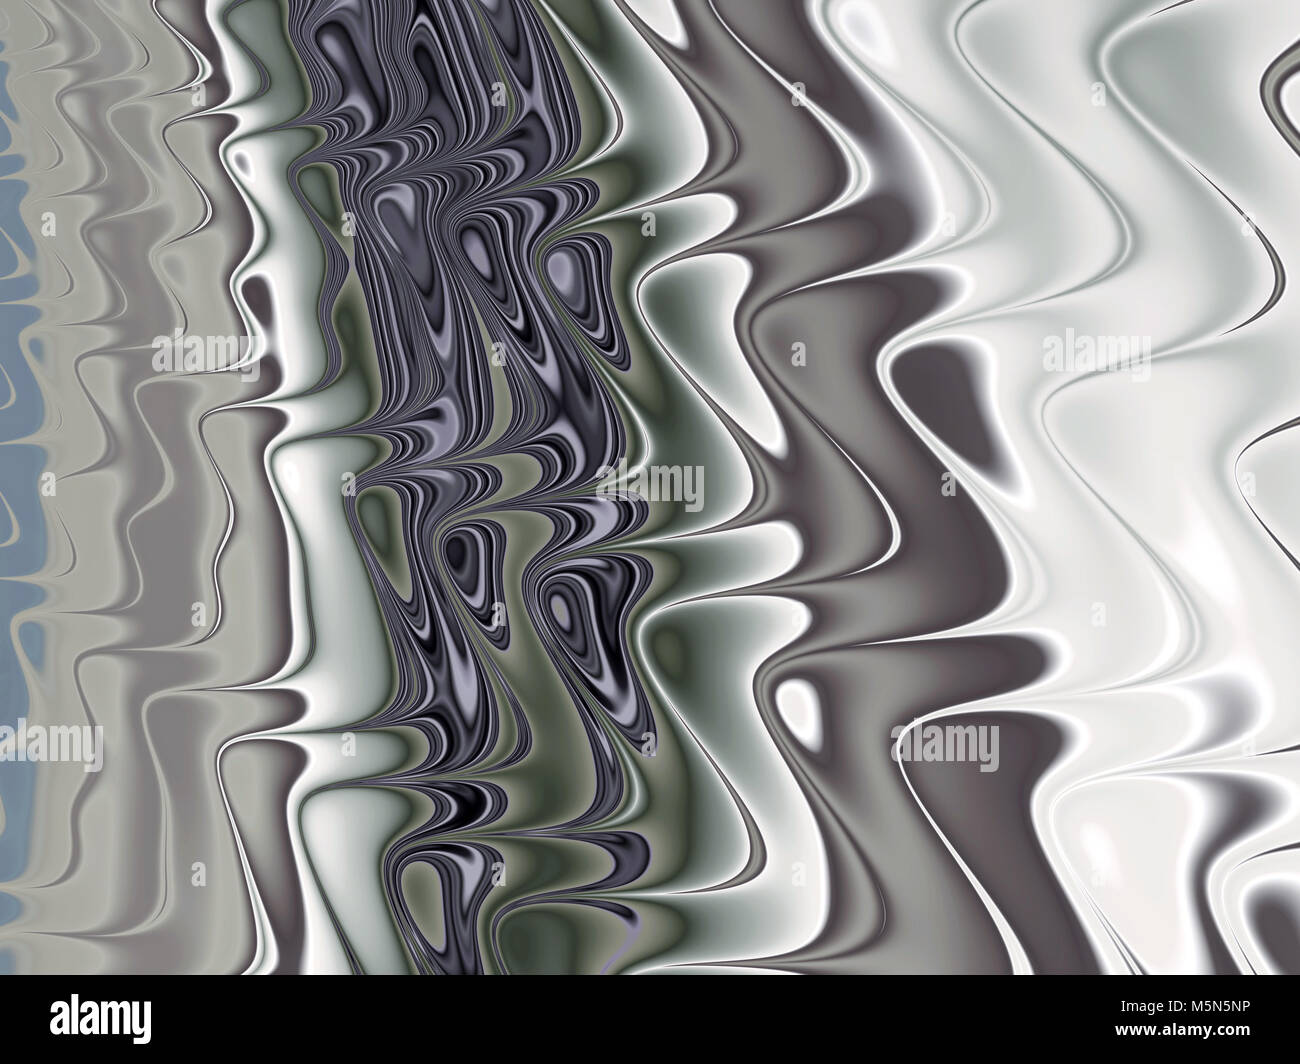 creative fractal abstract background with grey wavy pattern Stock Photo